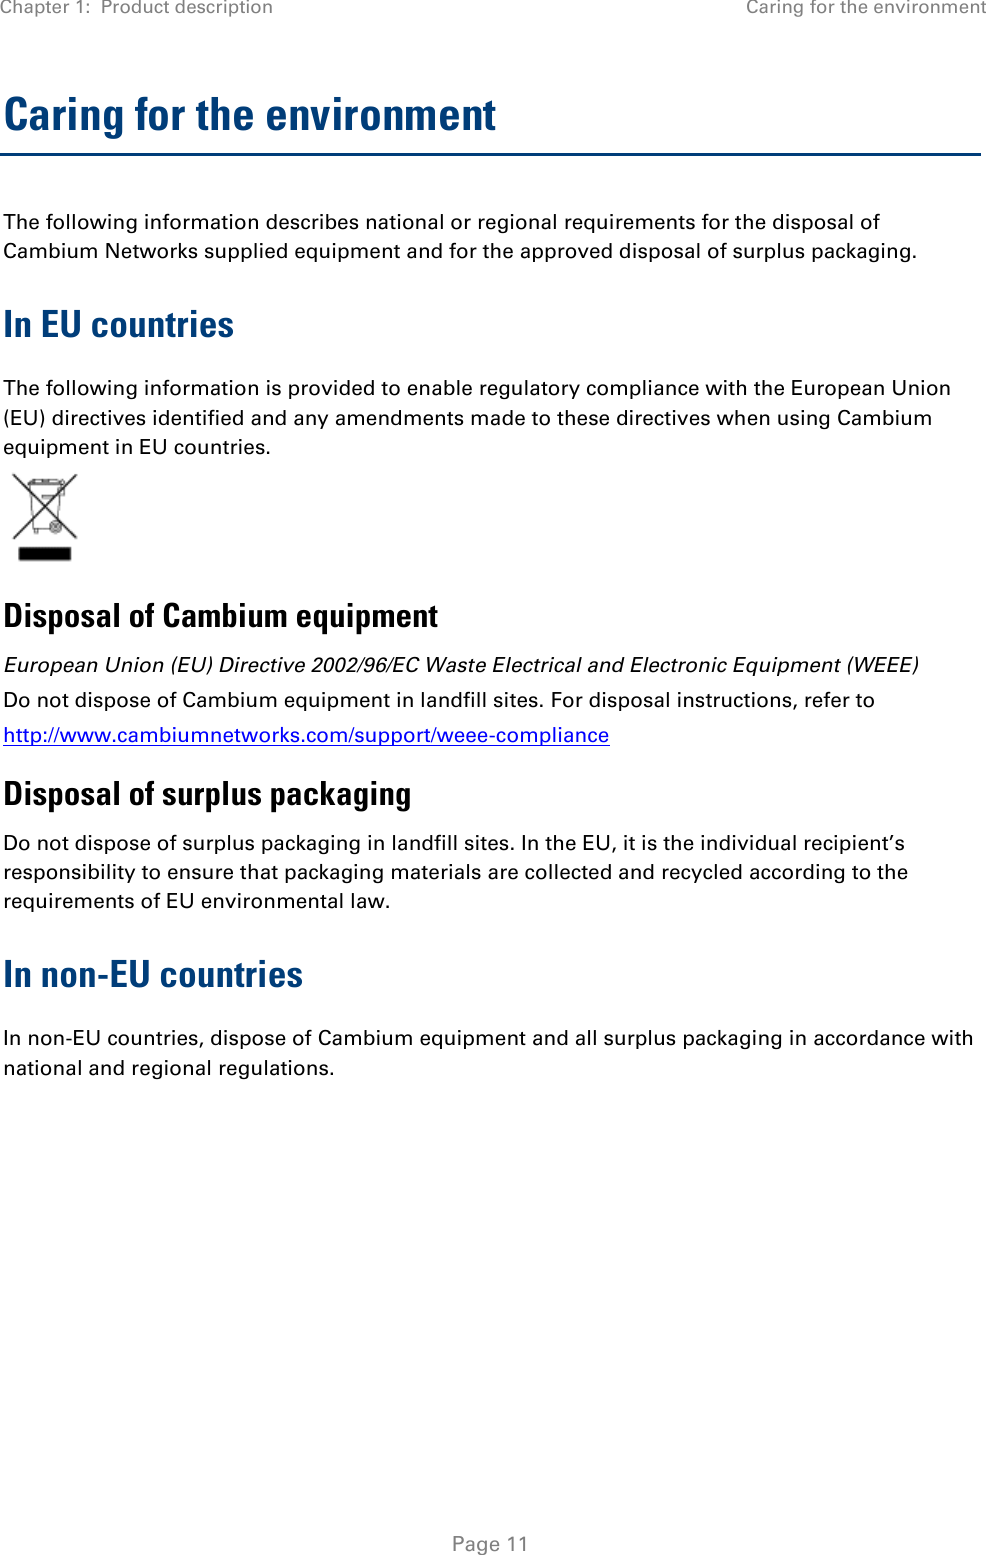 Chapter 1:  Product description Caring for the environment   Page 11 Caring for the environment The following information describes national or regional requirements for the disposal of Cambium Networks supplied equipment and for the approved disposal of surplus packaging. In EU countries The following information is provided to enable regulatory compliance with the European Union (EU) directives identified and any amendments made to these directives when using Cambium equipment in EU countries.  Disposal of Cambium equipment European Union (EU) Directive 2002/96/EC Waste Electrical and Electronic Equipment (WEEE) Do not dispose of Cambium equipment in landfill sites. For disposal instructions, refer to  http://www.cambiumnetworks.com/support/weee-compliance Disposal of surplus packaging Do not dispose of surplus packaging in landfill sites. In the EU, it is the individual recipient’s responsibility to ensure that packaging materials are collected and recycled according to the requirements of EU environmental law. In non-EU countries In non-EU countries, dispose of Cambium equipment and all surplus packaging in accordance with national and regional regulations.  